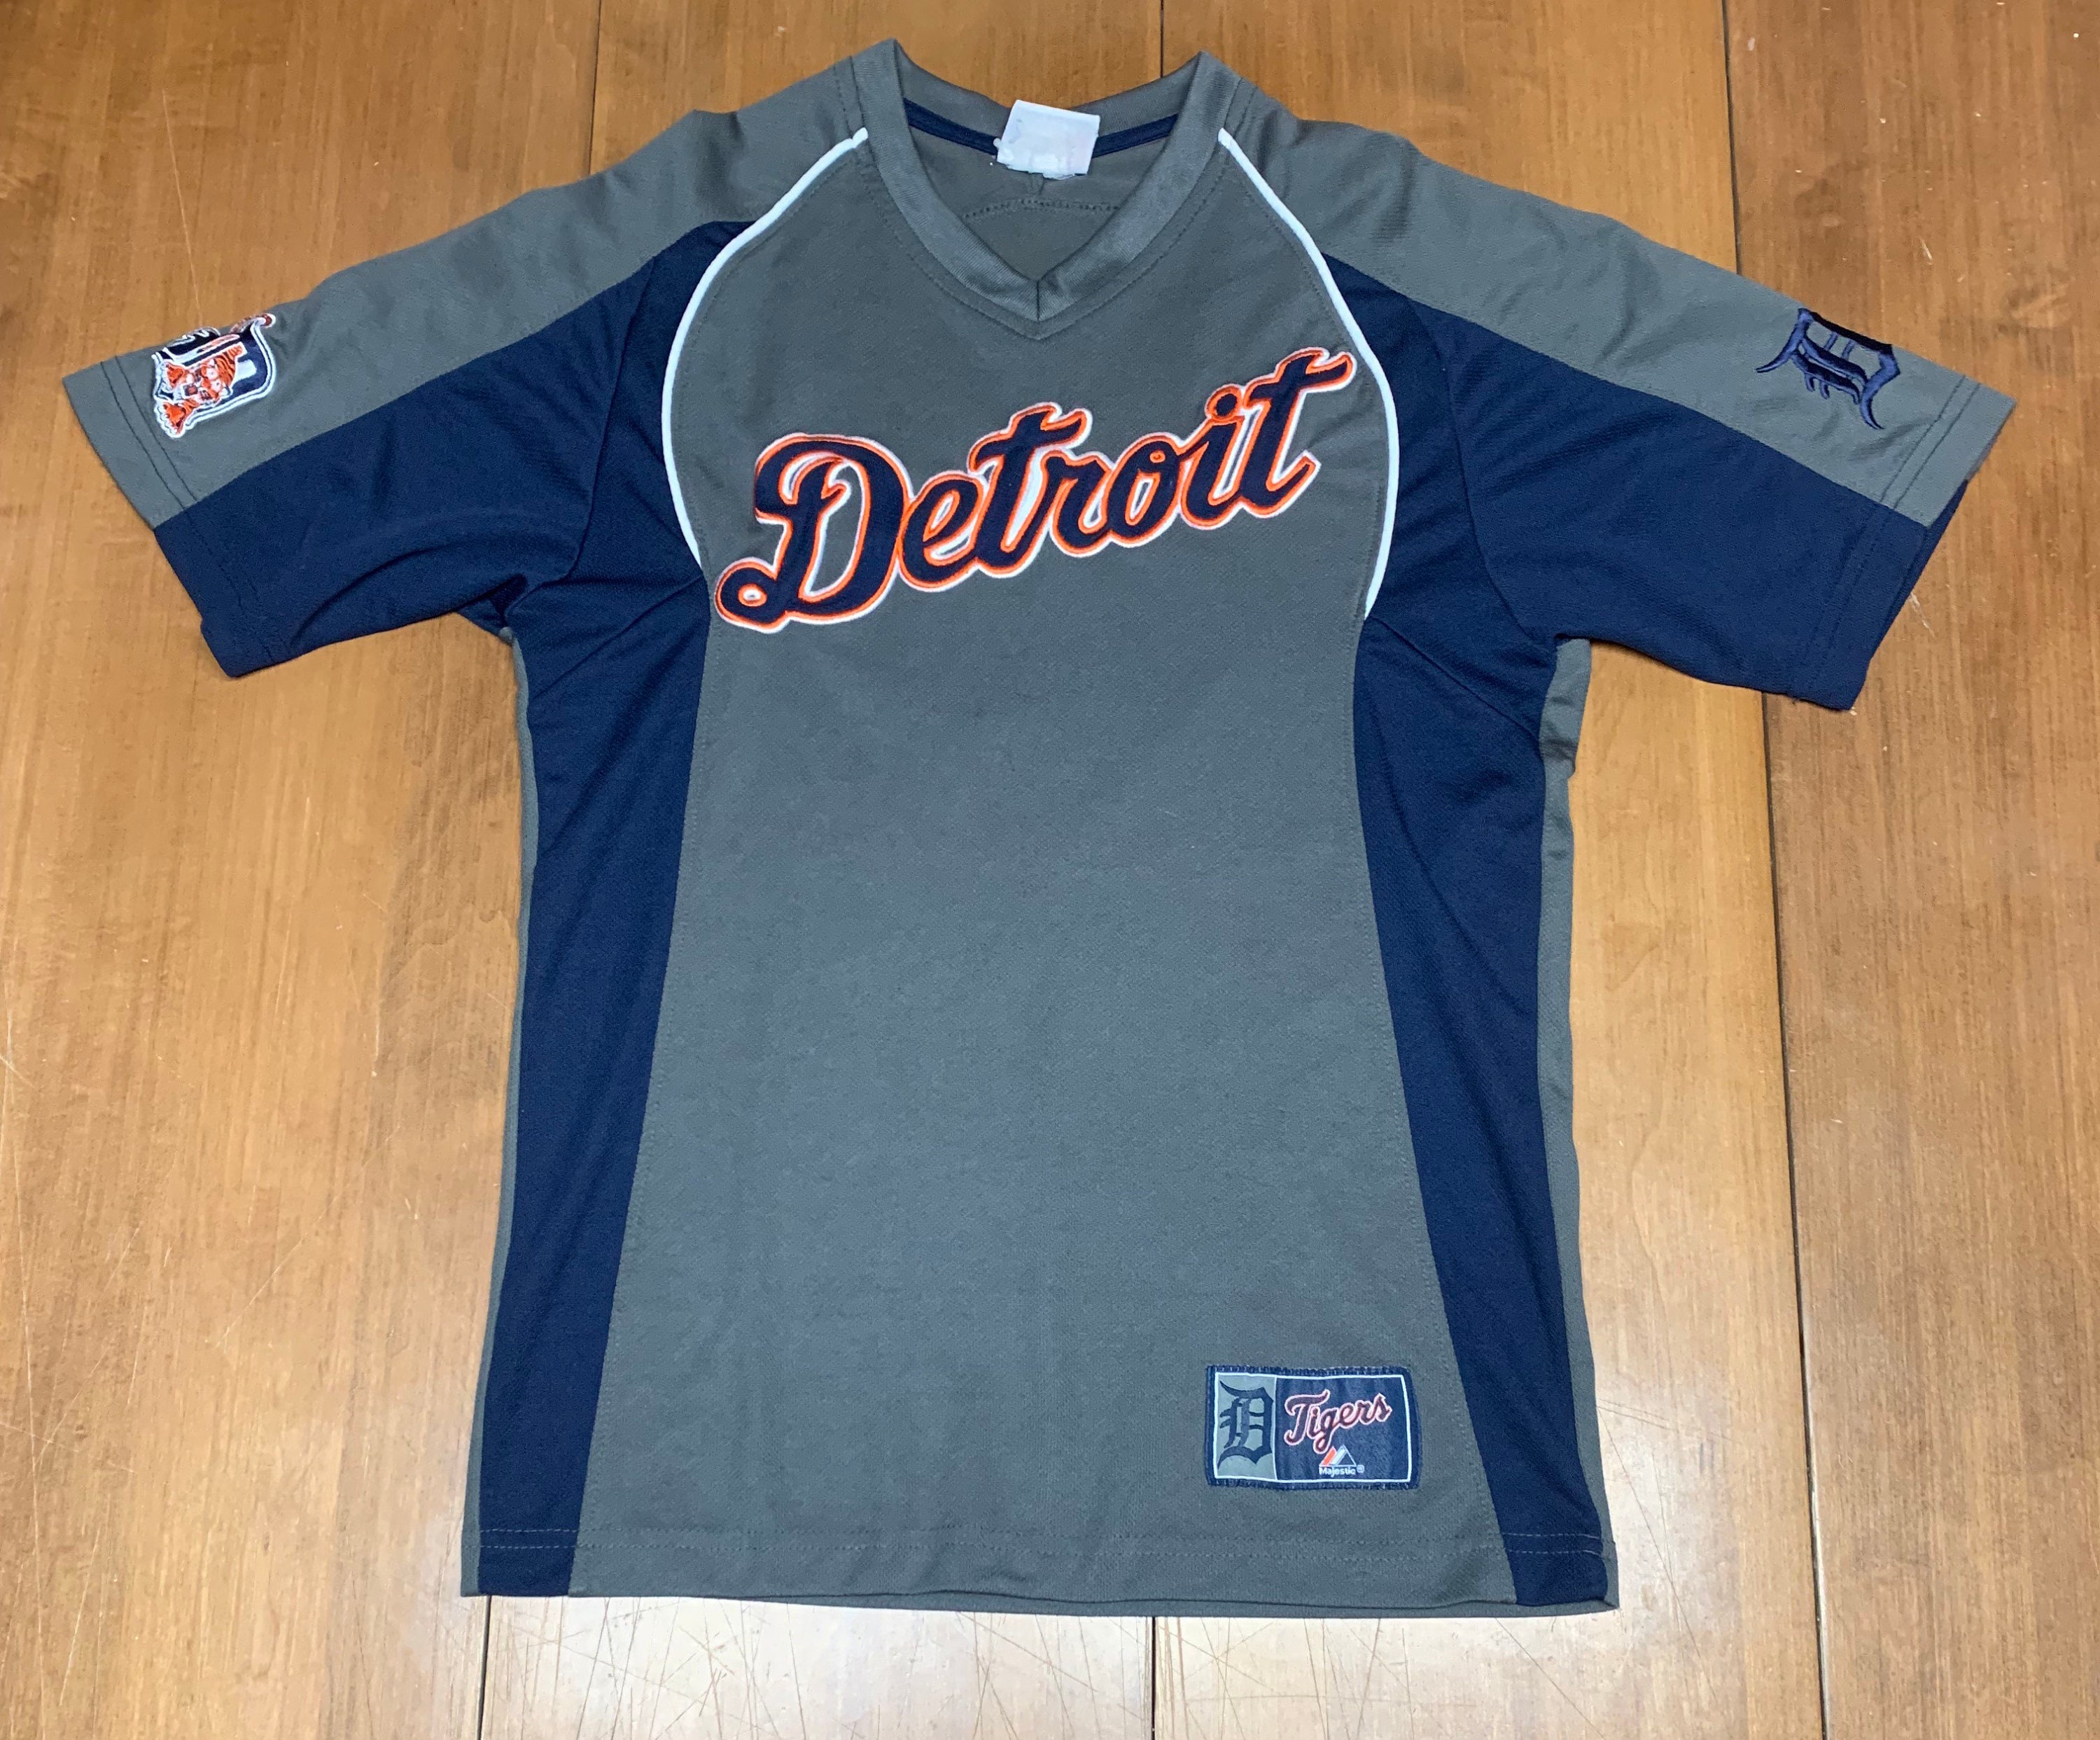 Gibson #23 Detroit Tigers Classic Road Jersey T-Shirt by Vintage Detroit Collection